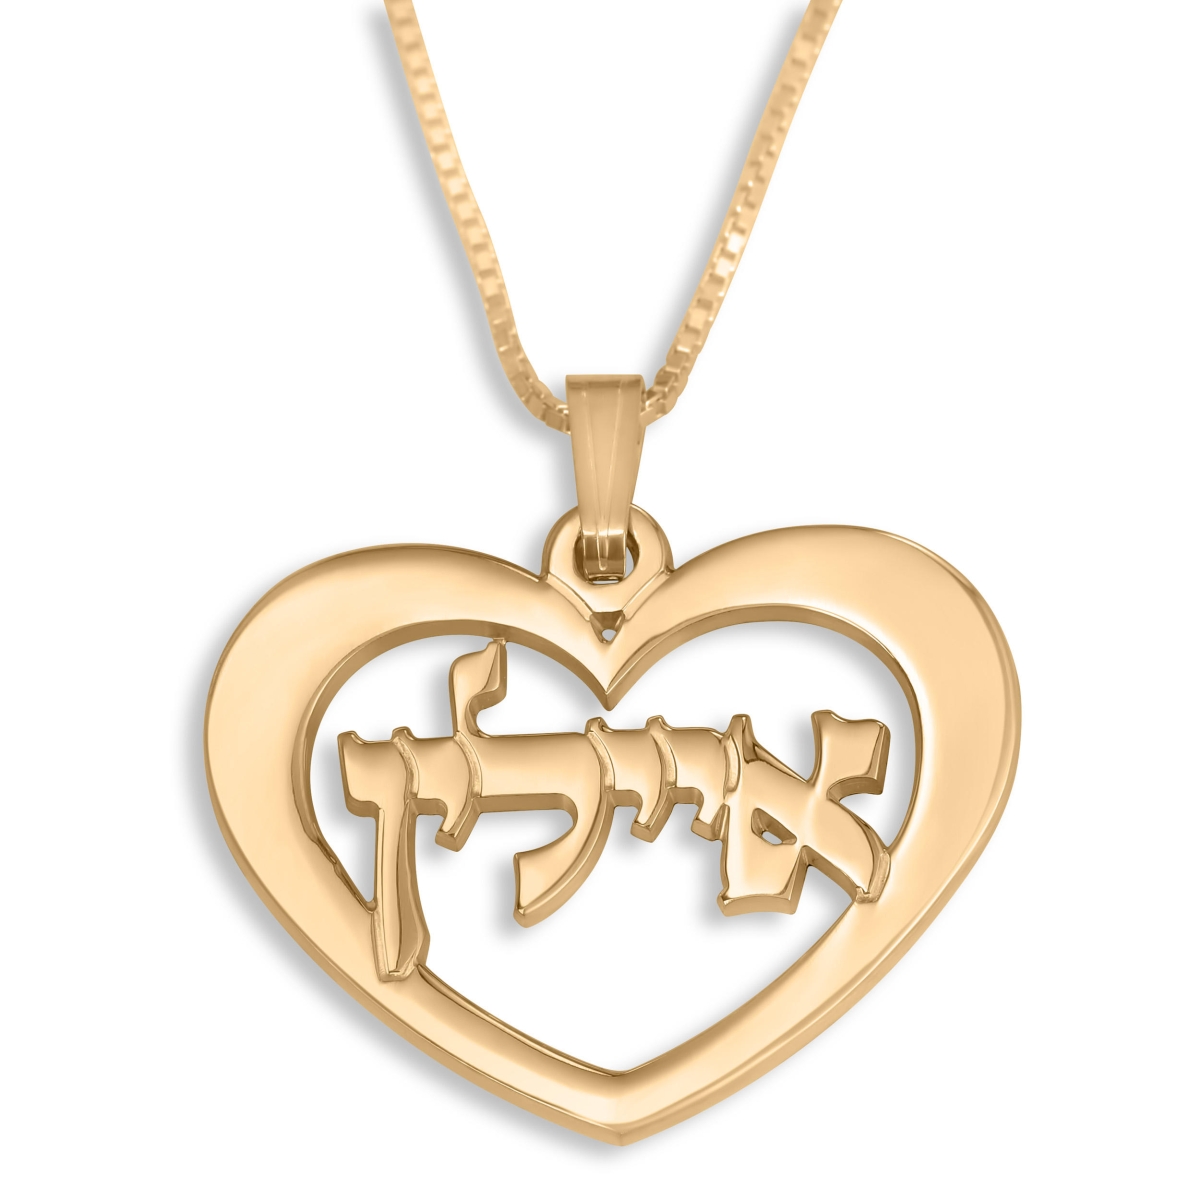 Hebrew Name Necklace - 24K Gold Plated Silver Heart Necklace with Name in Hebrew-Calibri Script - 1